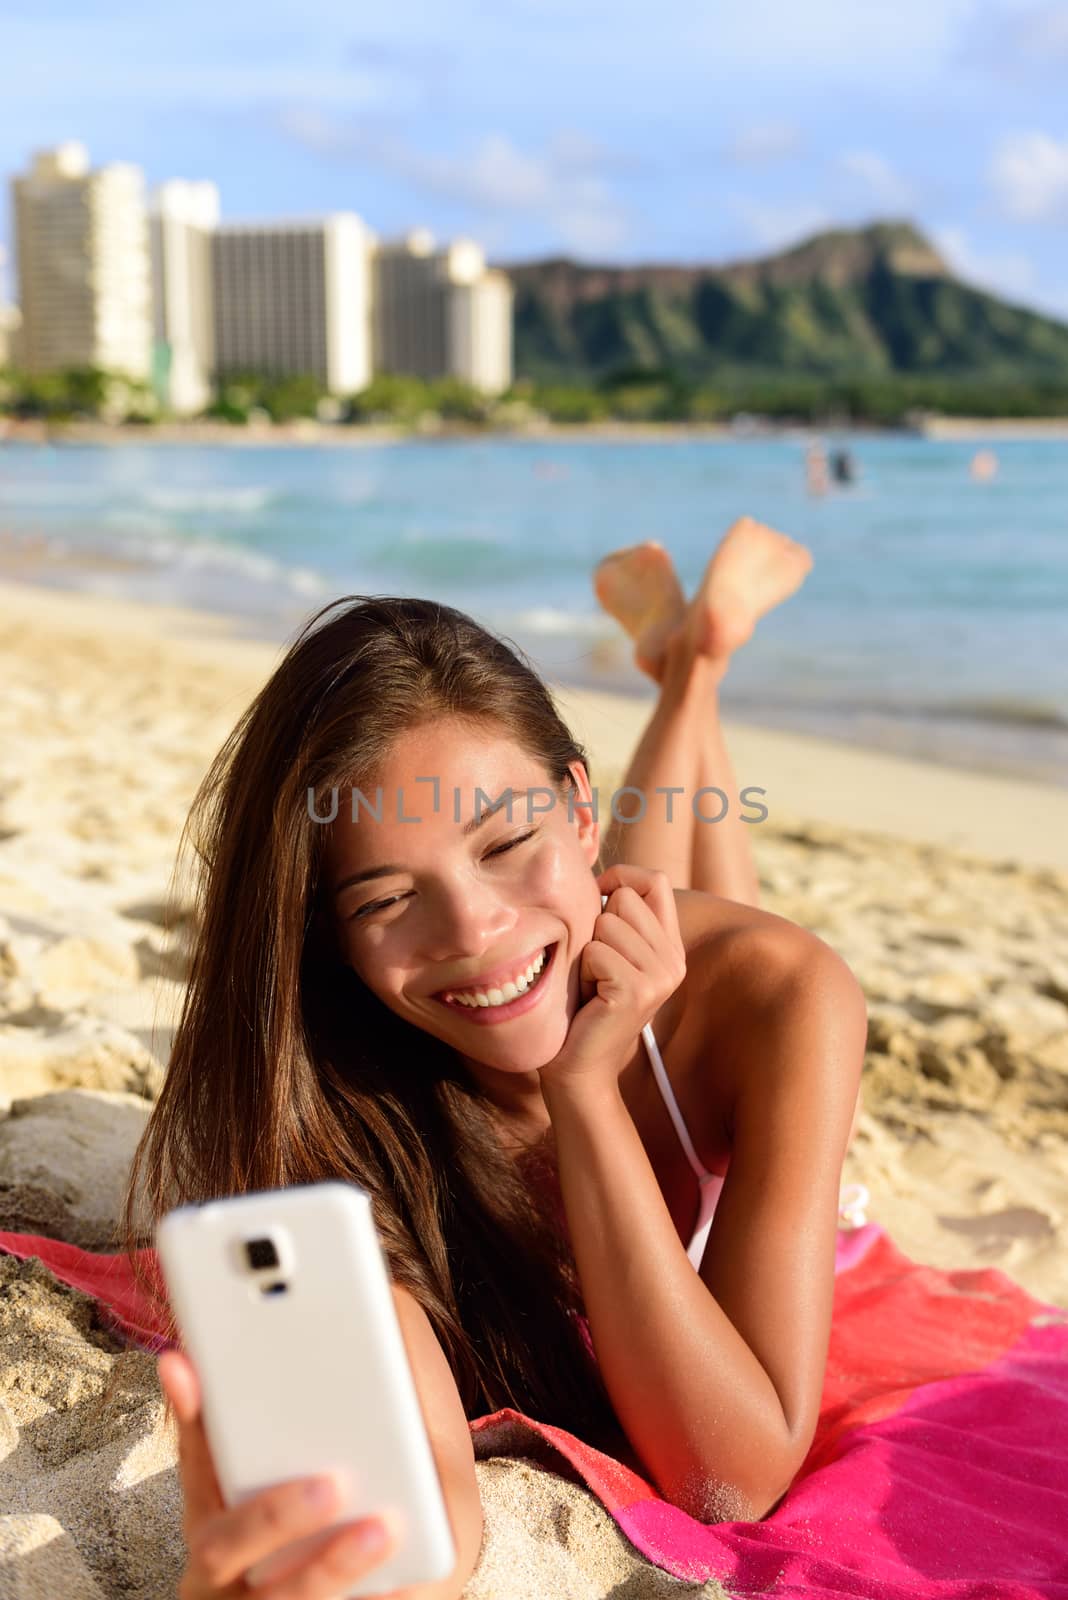 Smart phone woman using smartphone app on beach smiling laughing having fun. Girl reading or messaging or browsing on internet smiling happy outdoors. Mixed race female model on Waikiki Oahu, Hawaii.